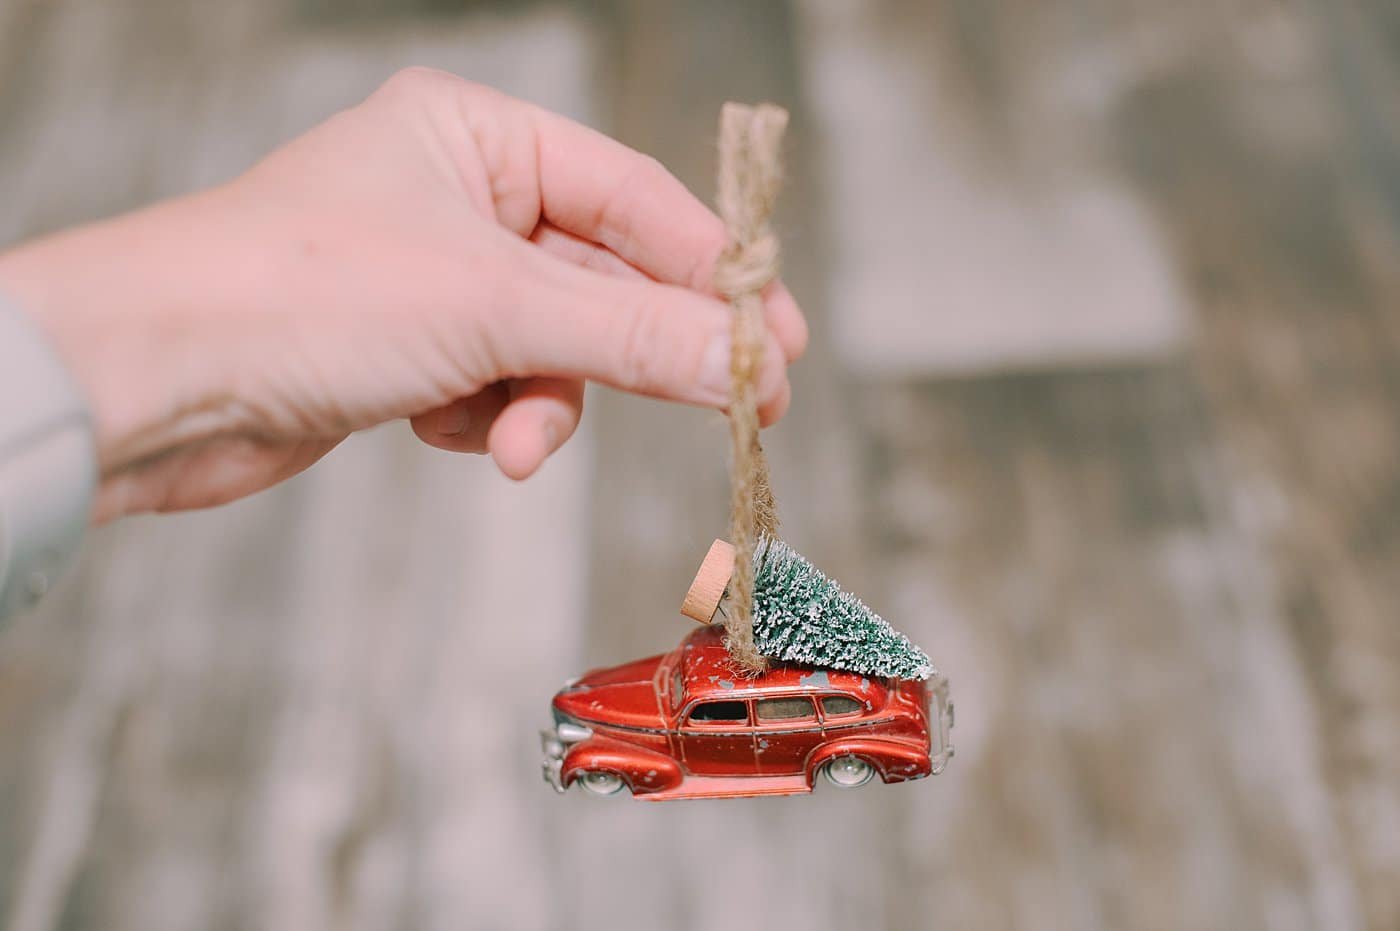 matchbox car ornament with bottle brush tree for Christmas tree